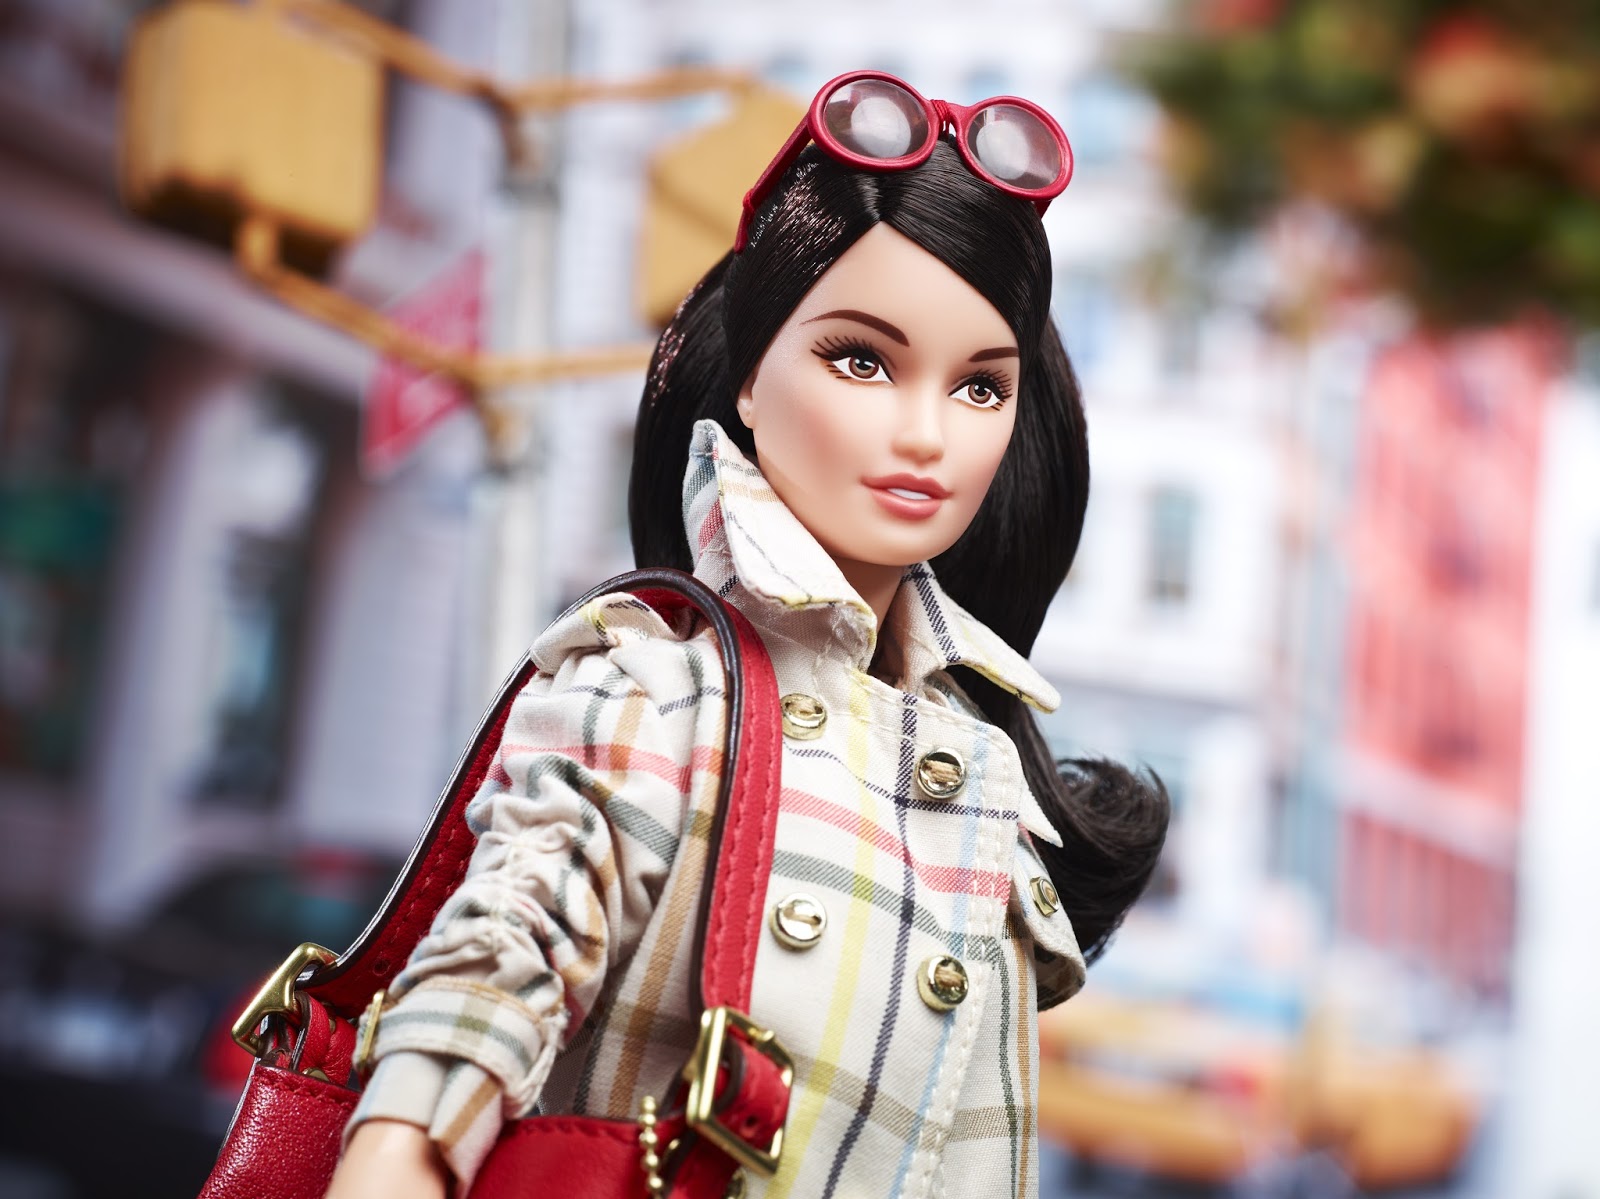 Introducing the Coach Barbie Doll